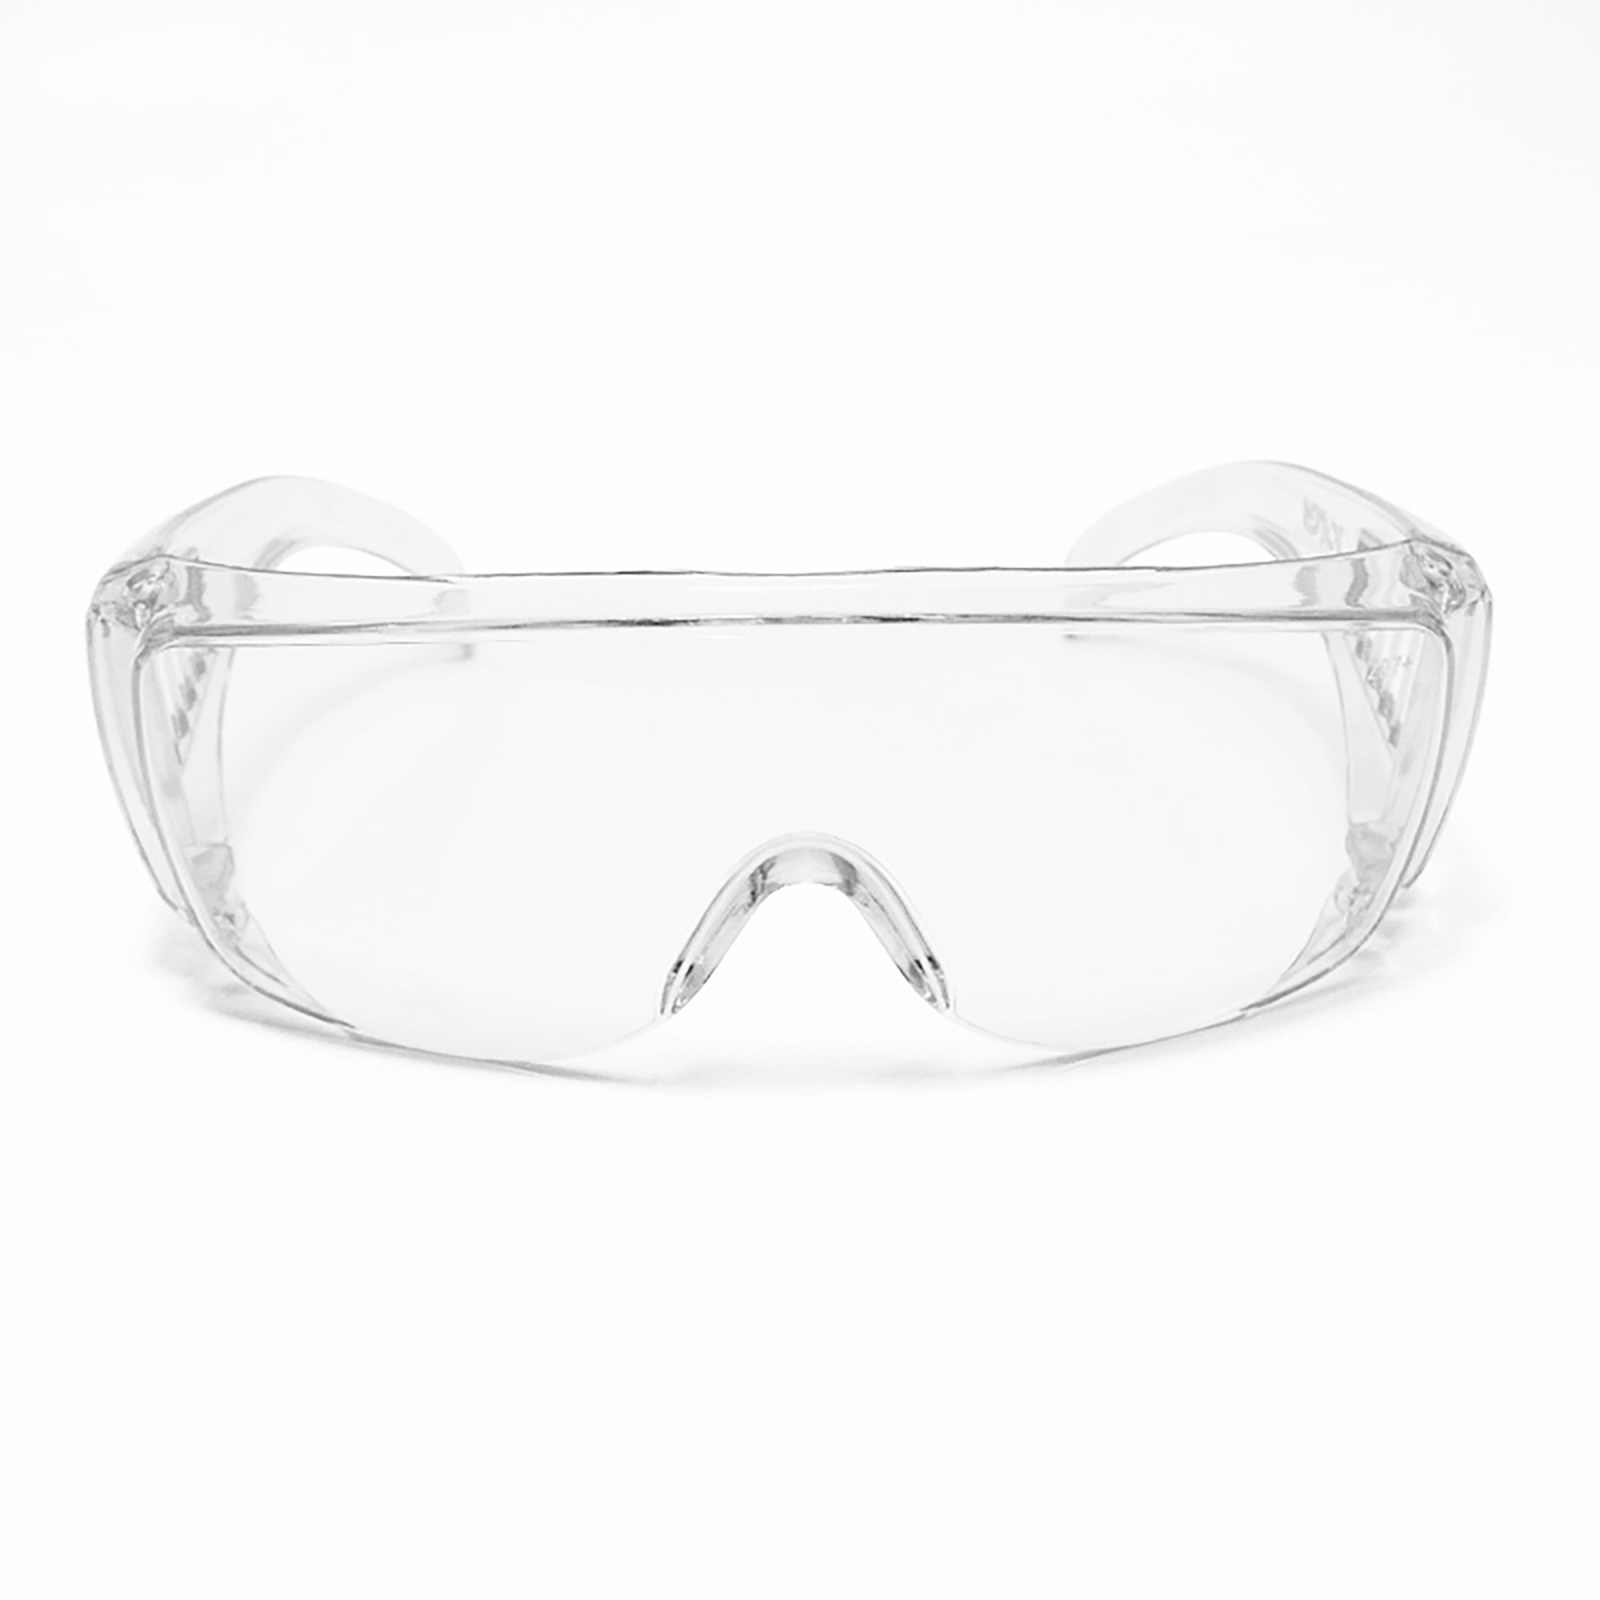 Front view of the Clear JORESTECH safety overglasses for high impact protection over white background